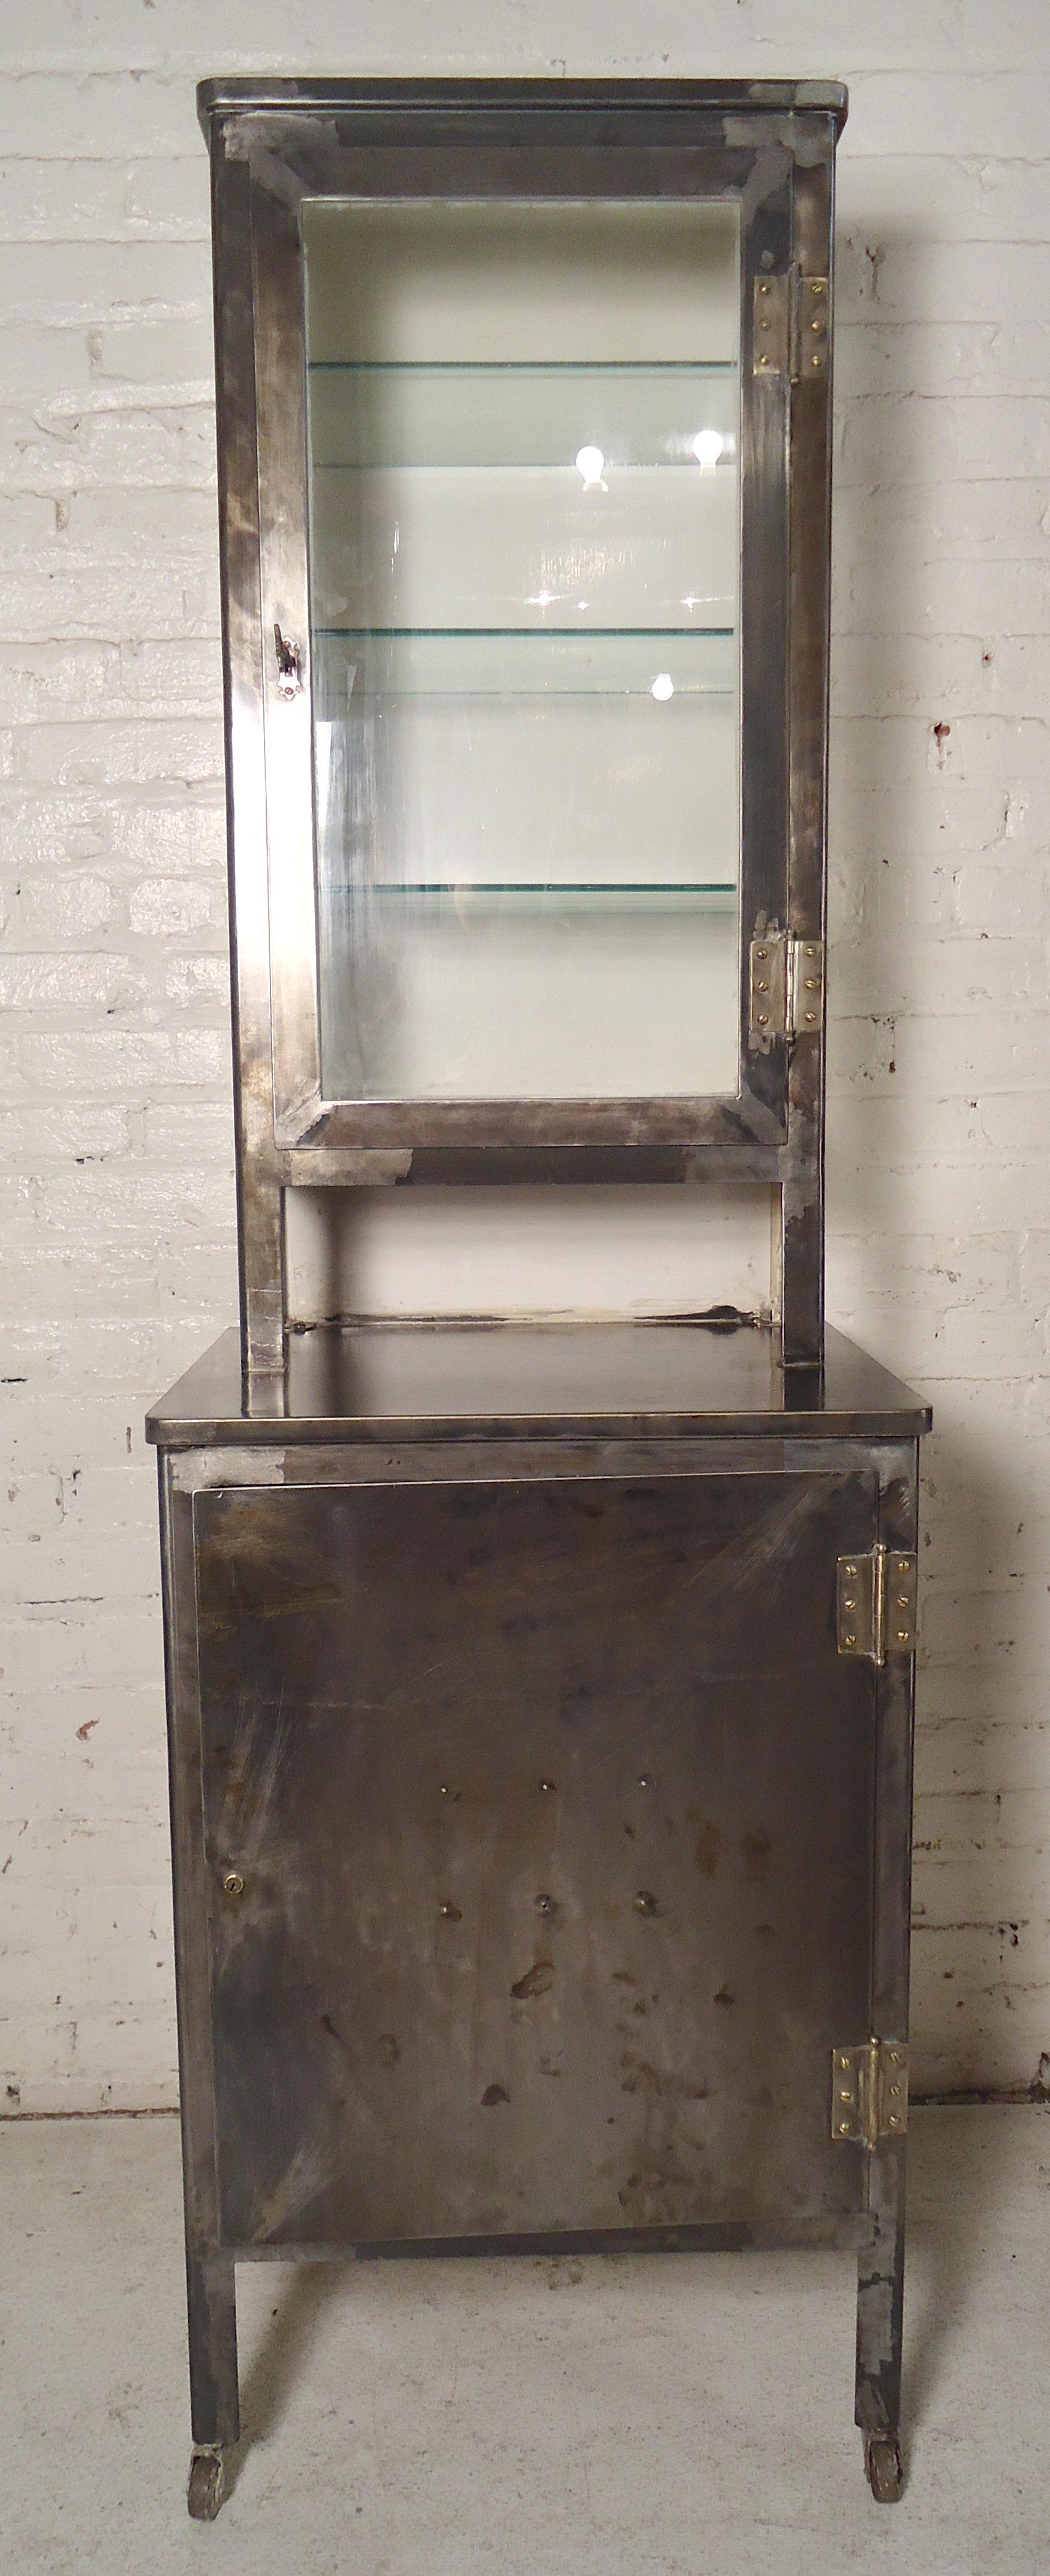 Vintage metal storage unit with glass display cabinet. Restored in a bare metal style finish. 
Top cabinet: 19